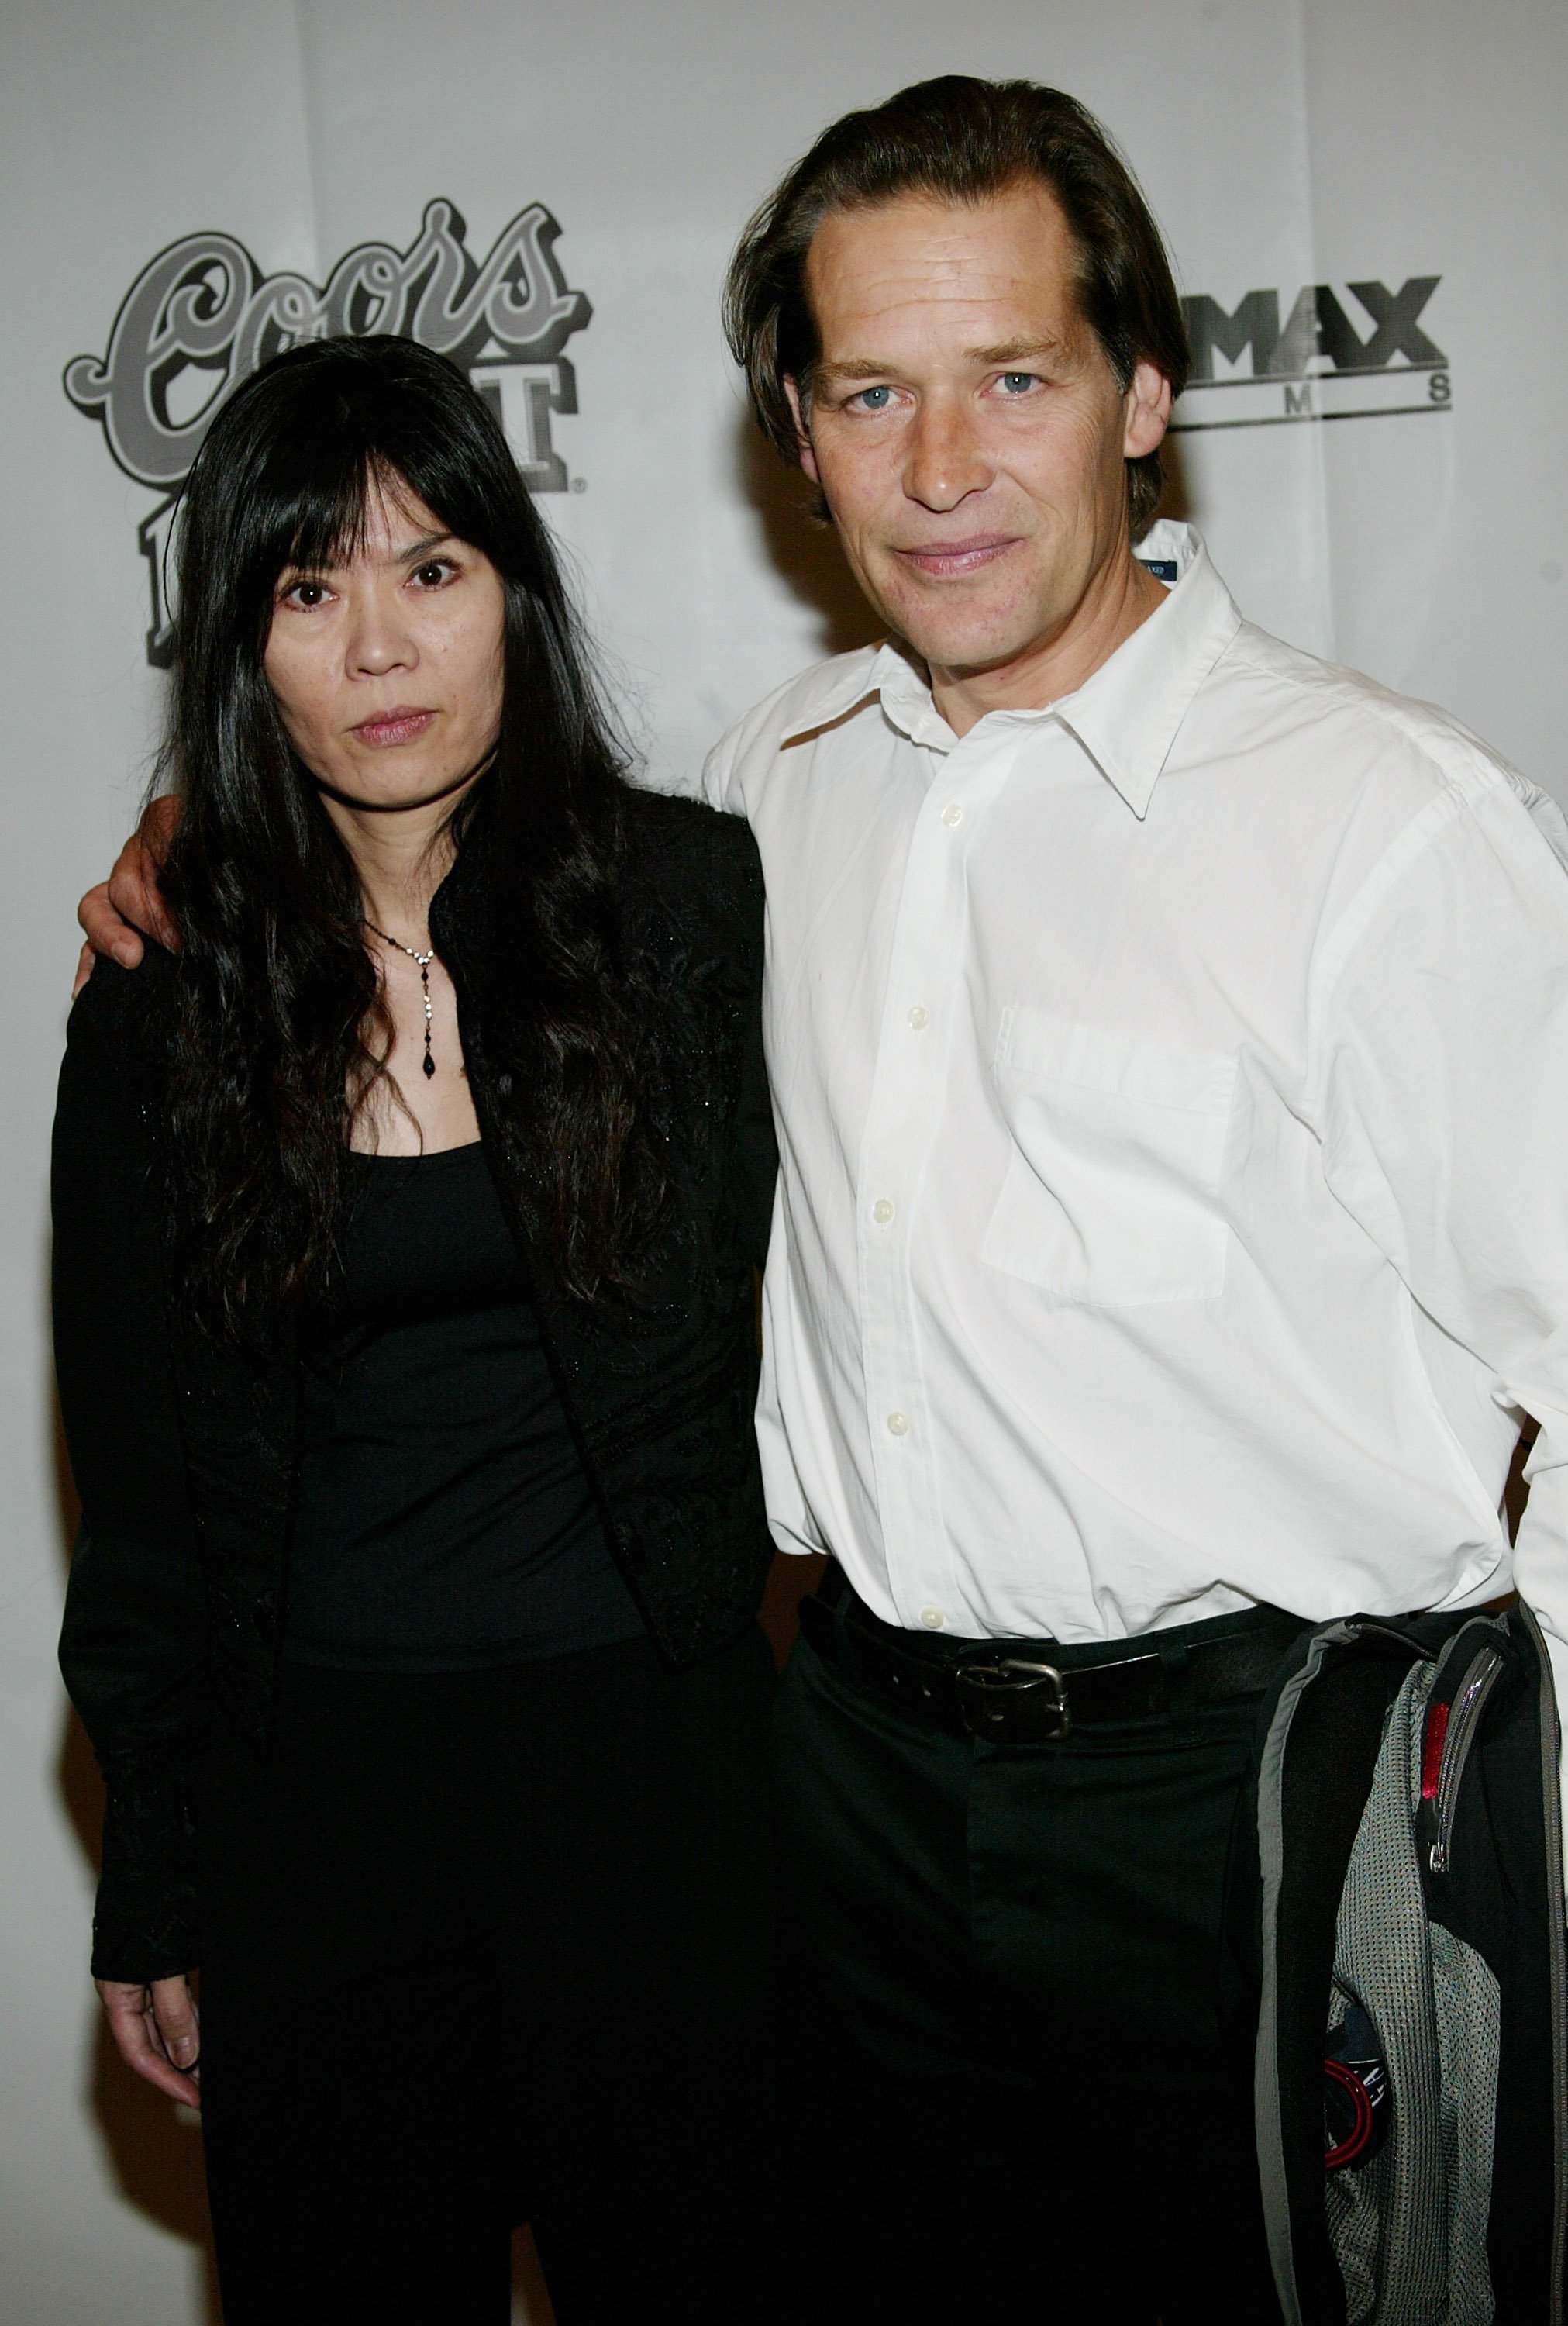 James Remar and wife, Atsuko, attend the "Duplex" film premiere at the Beekman Theater September 18, 2003, in New York City. | Source: Getty Images.